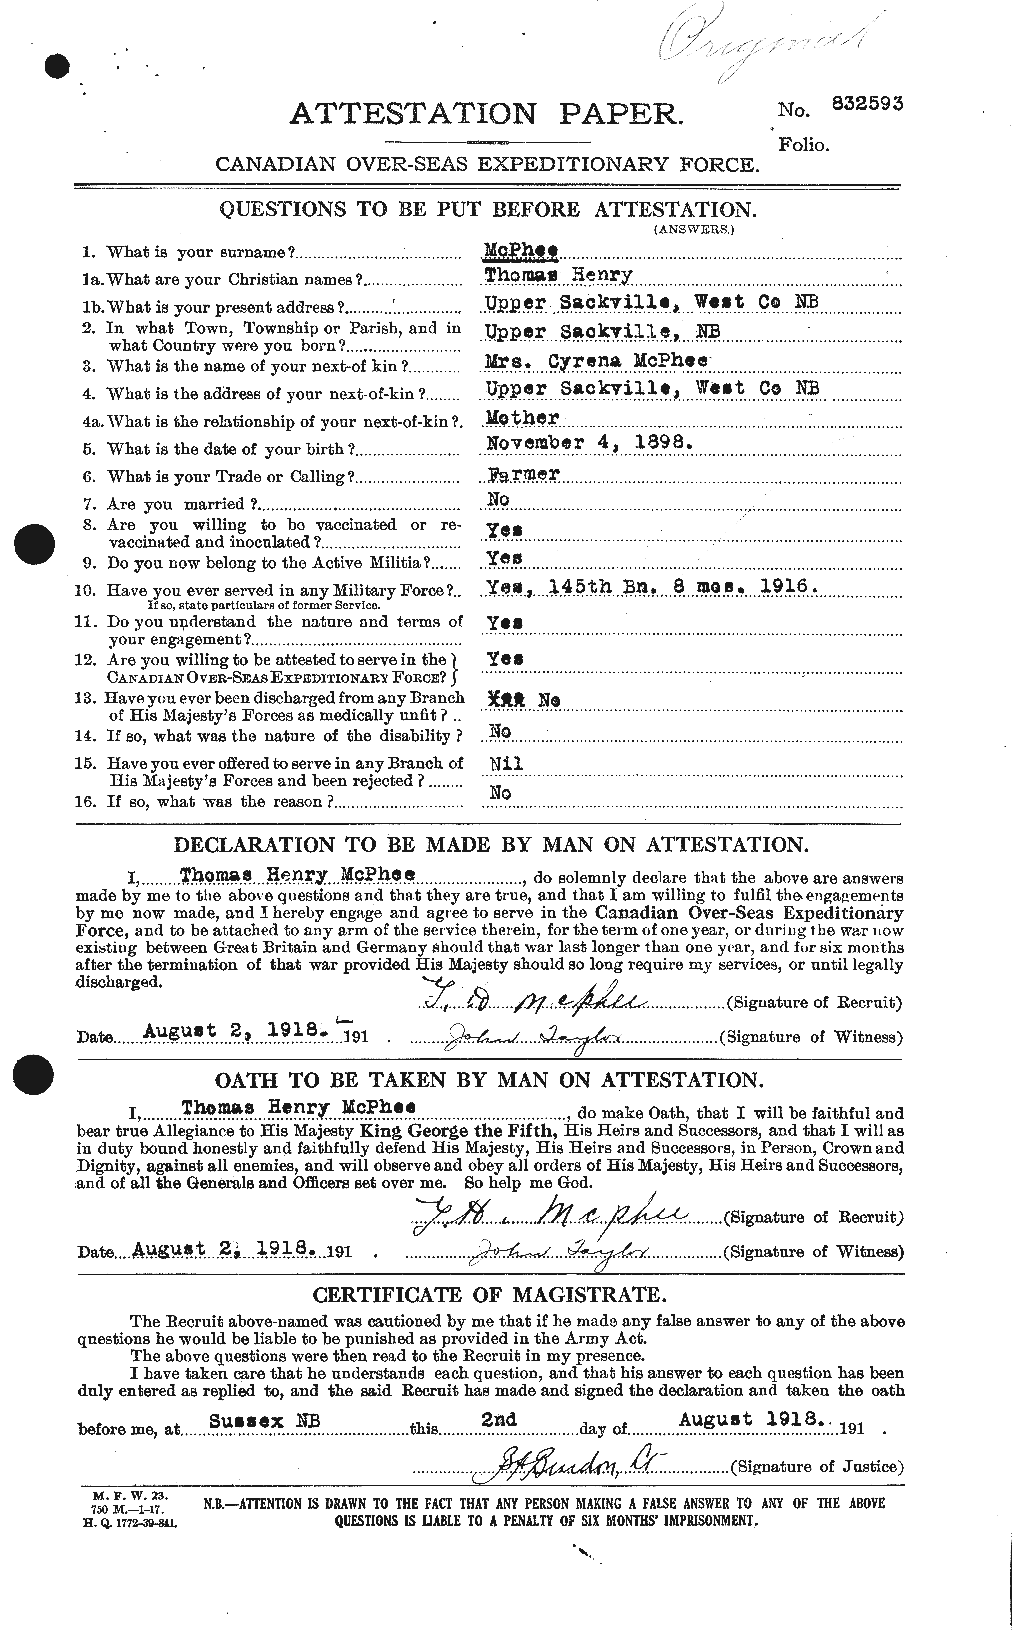 Personnel Records of the First World War - CEF 541197a